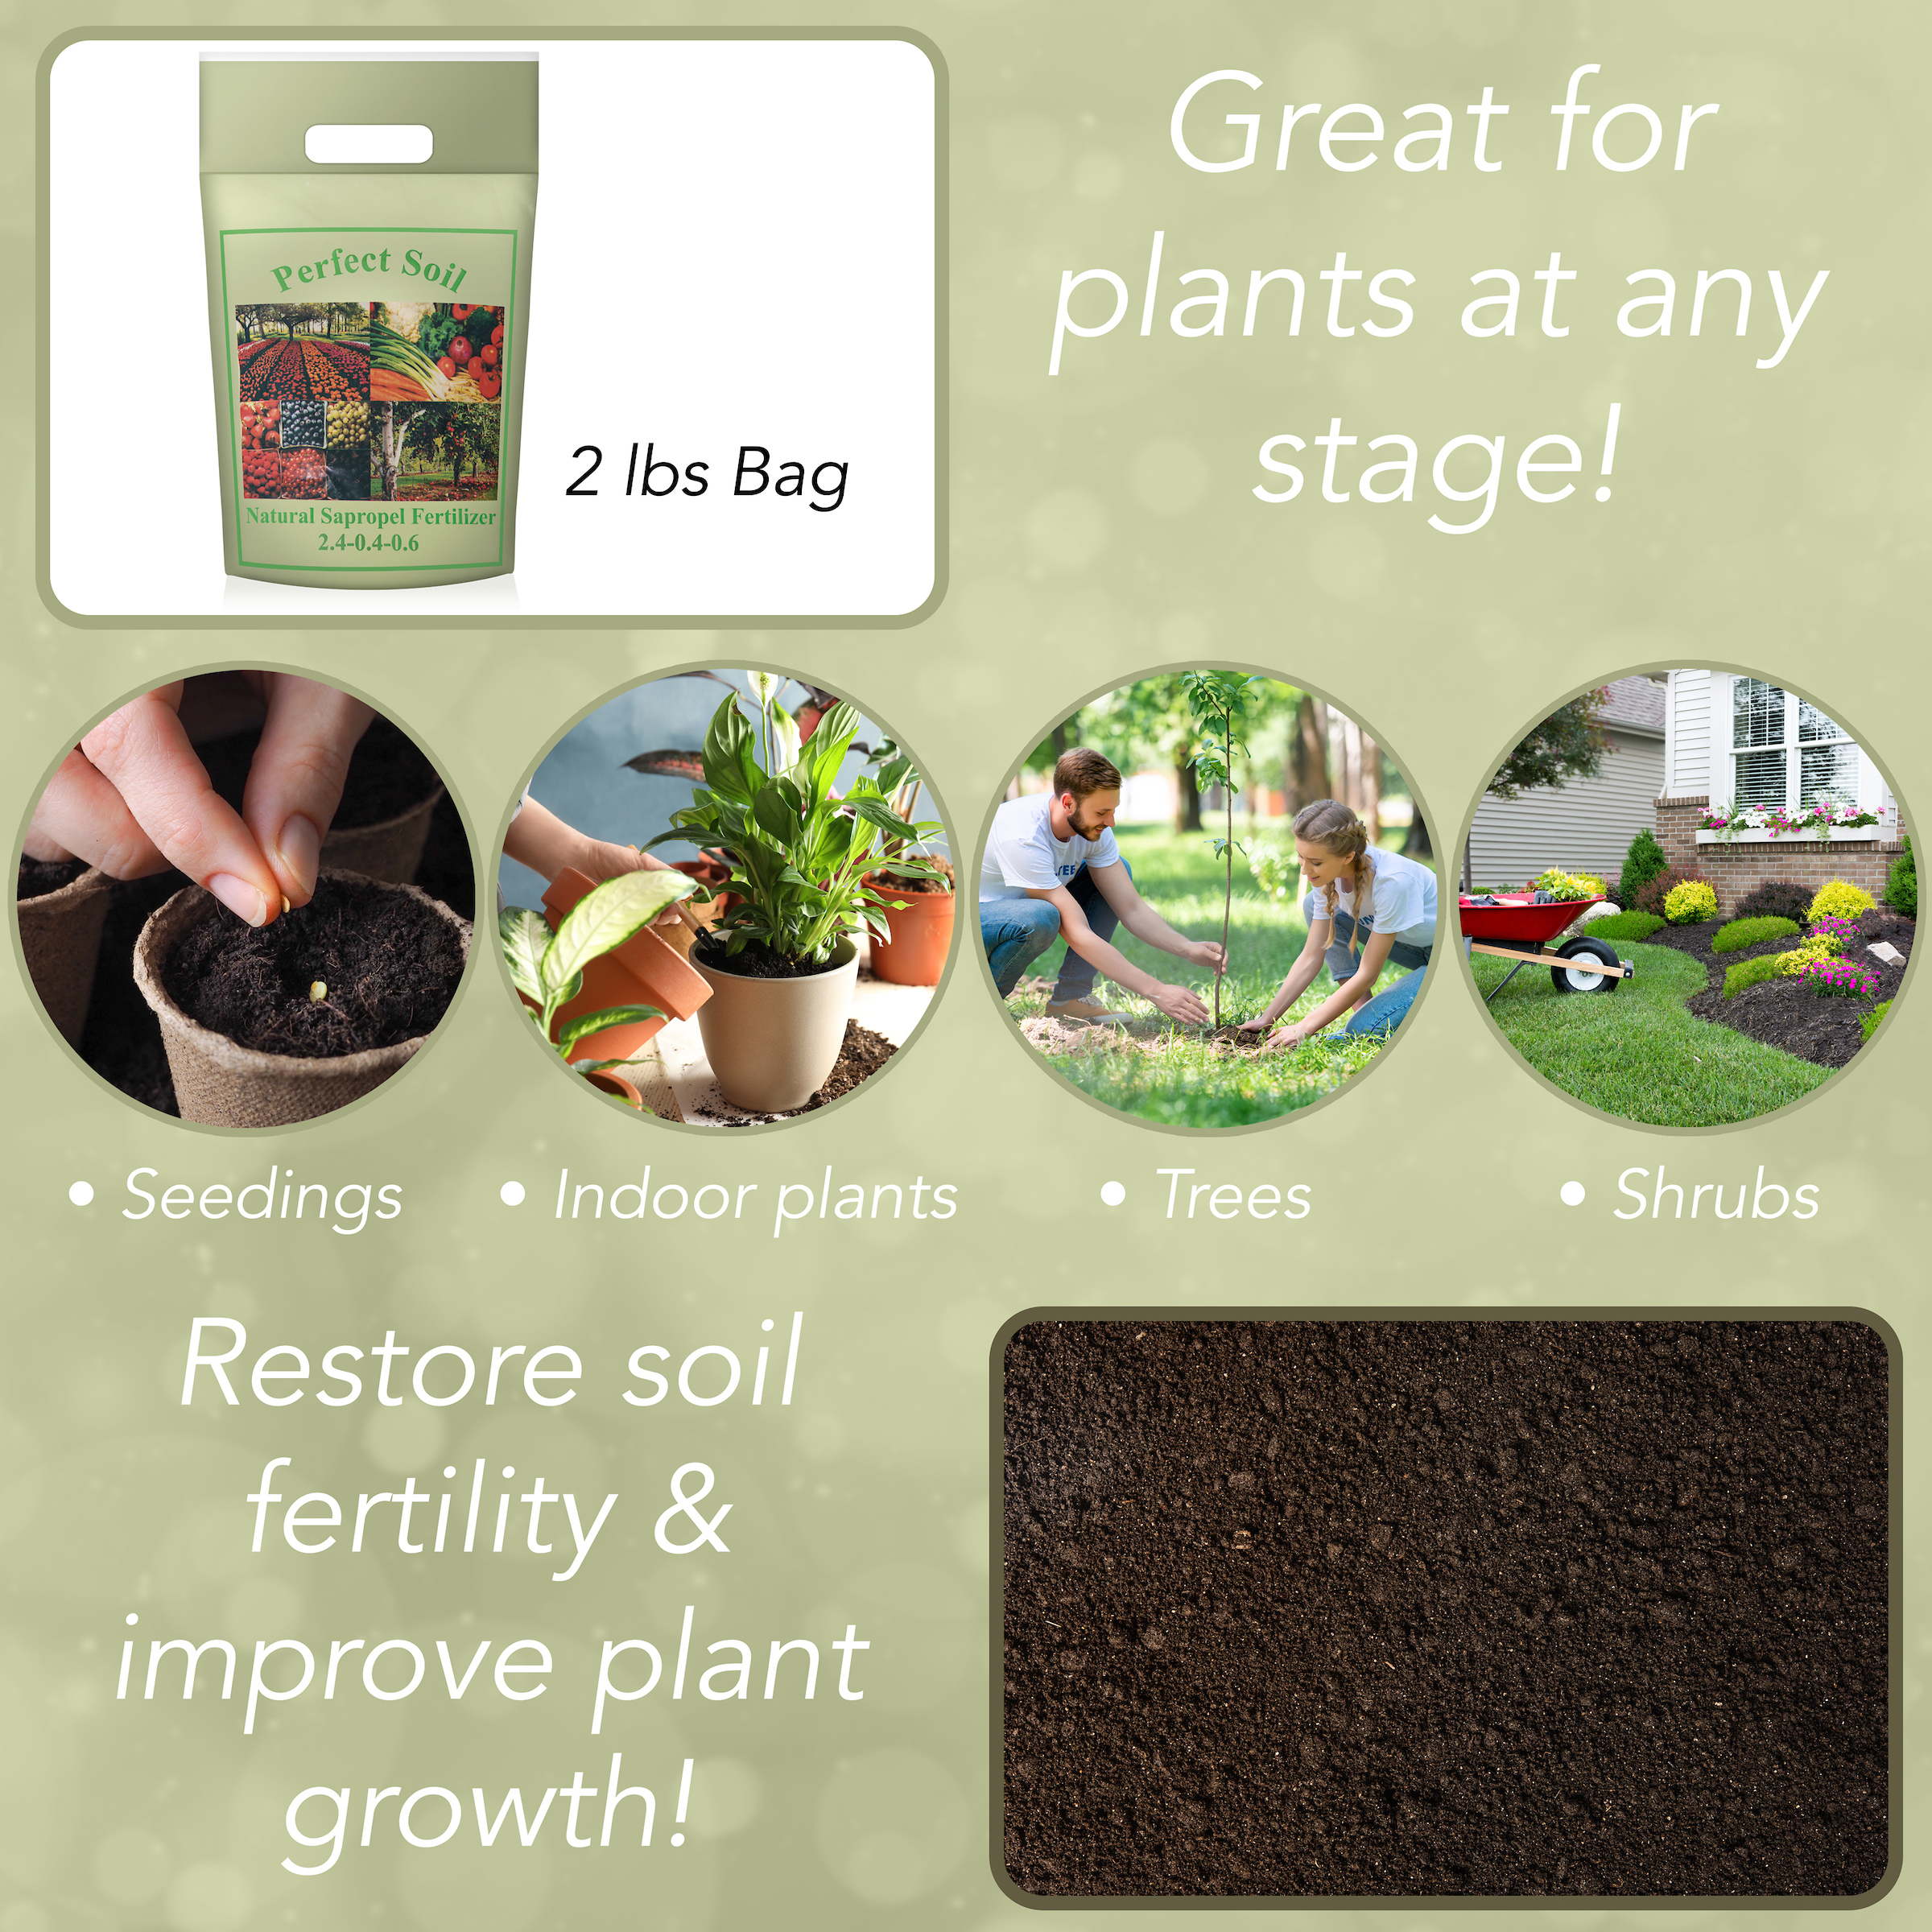 Perfect Soil Sapropel Organic Fertilizer for Vegetables and Plant Food - Grow a Healthier Garden and Protect Your Plants from Disease with Organic Garden Fertilizer for Indoor and Outdoor Plants - image 5 of 7